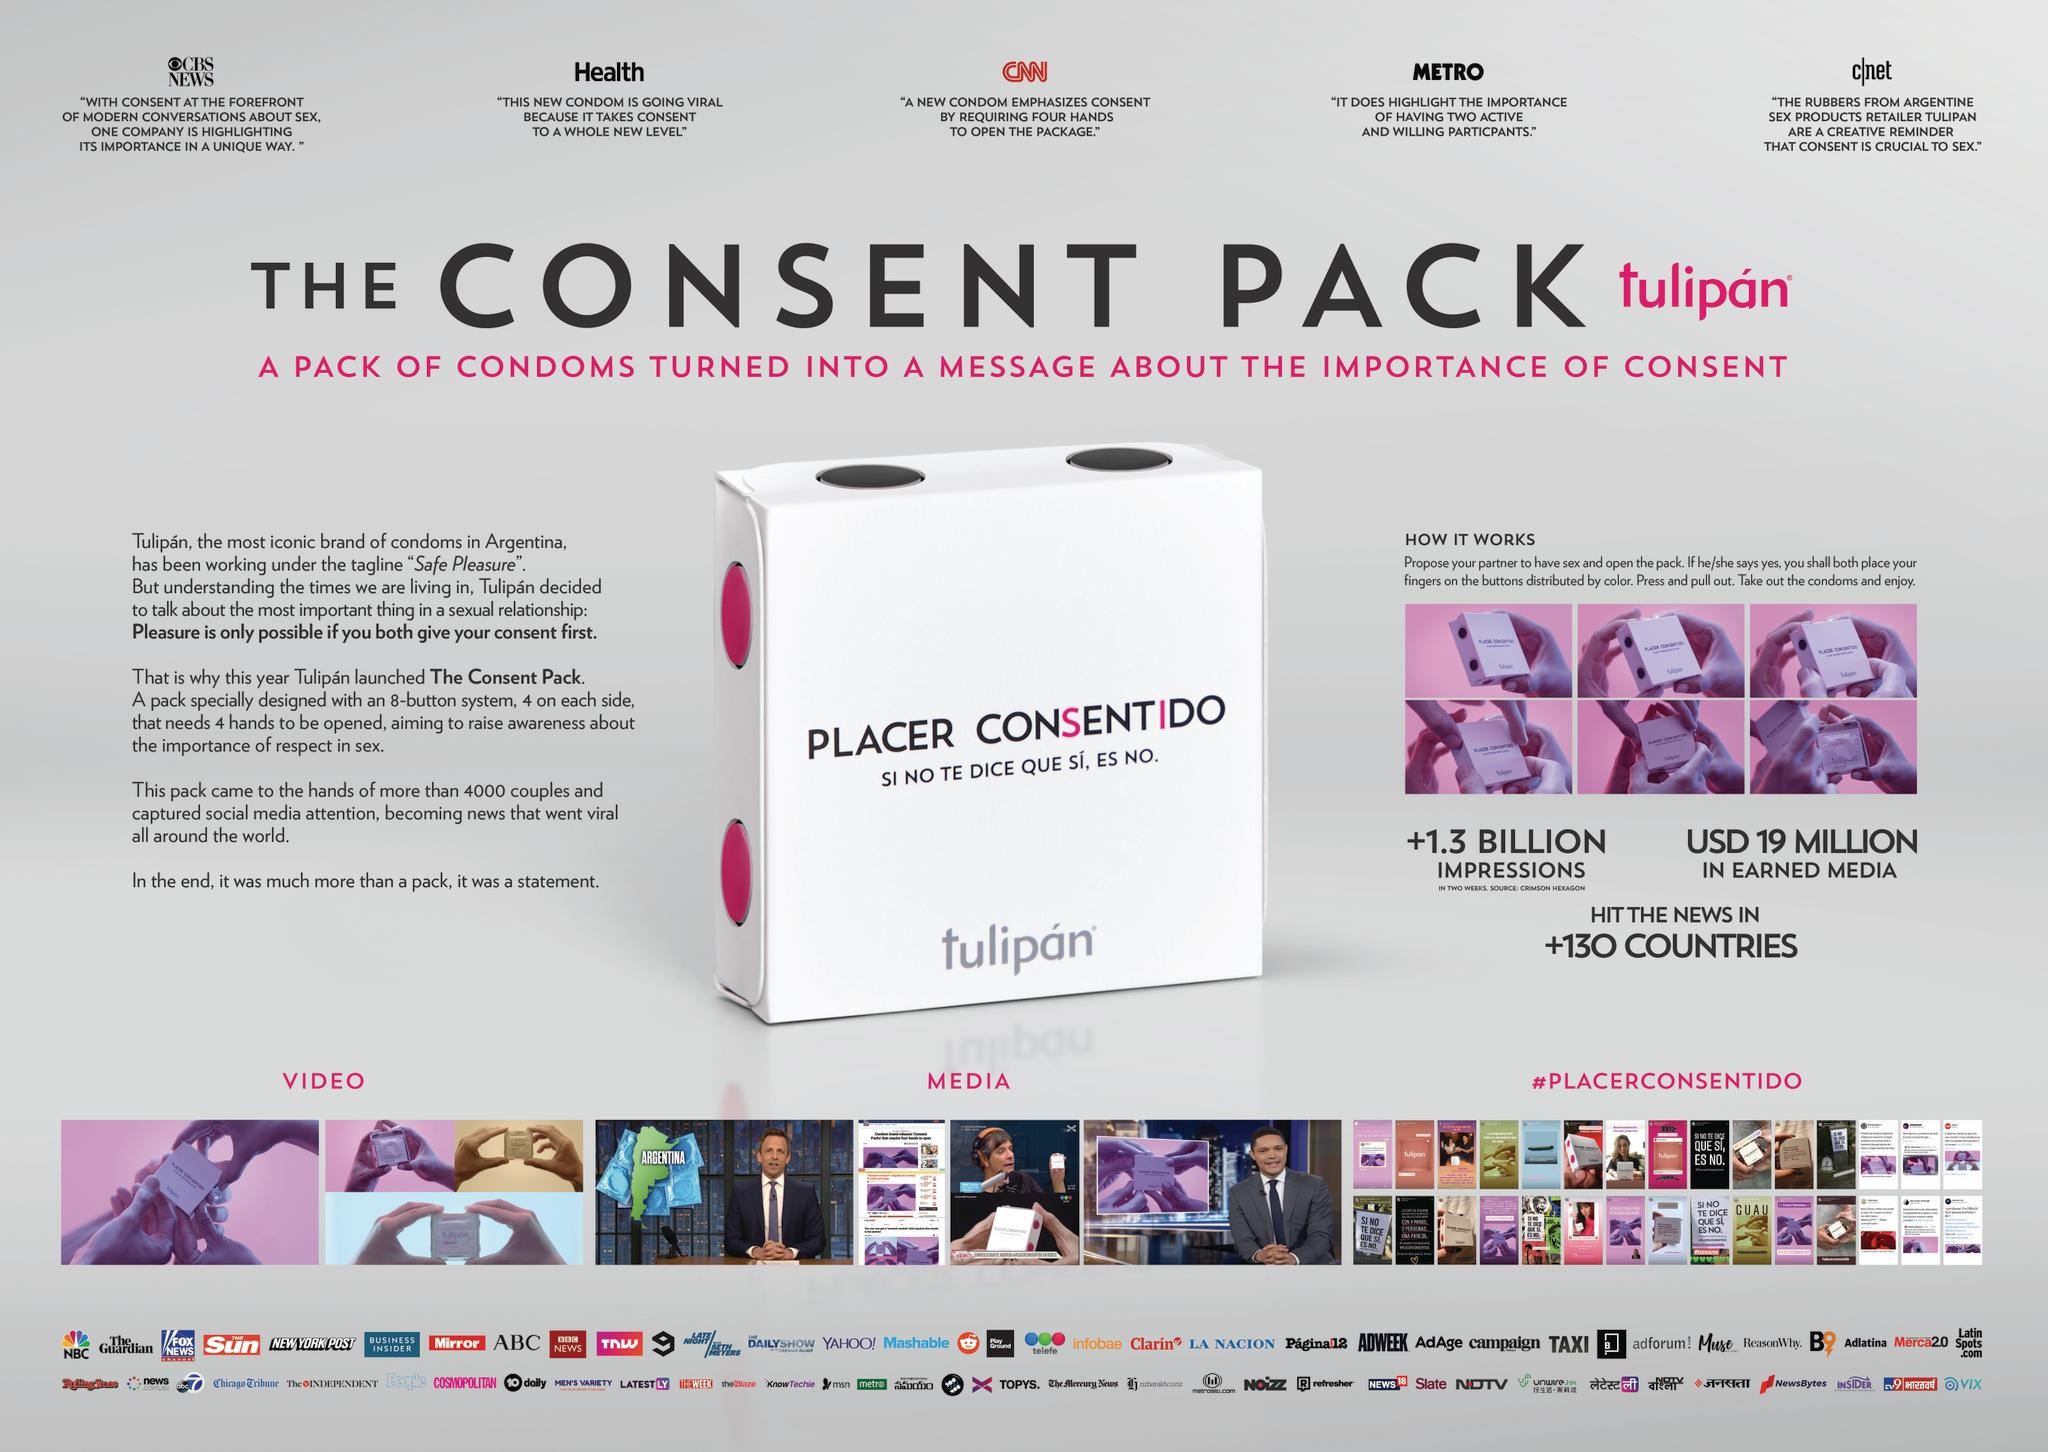 CONSENT PACK